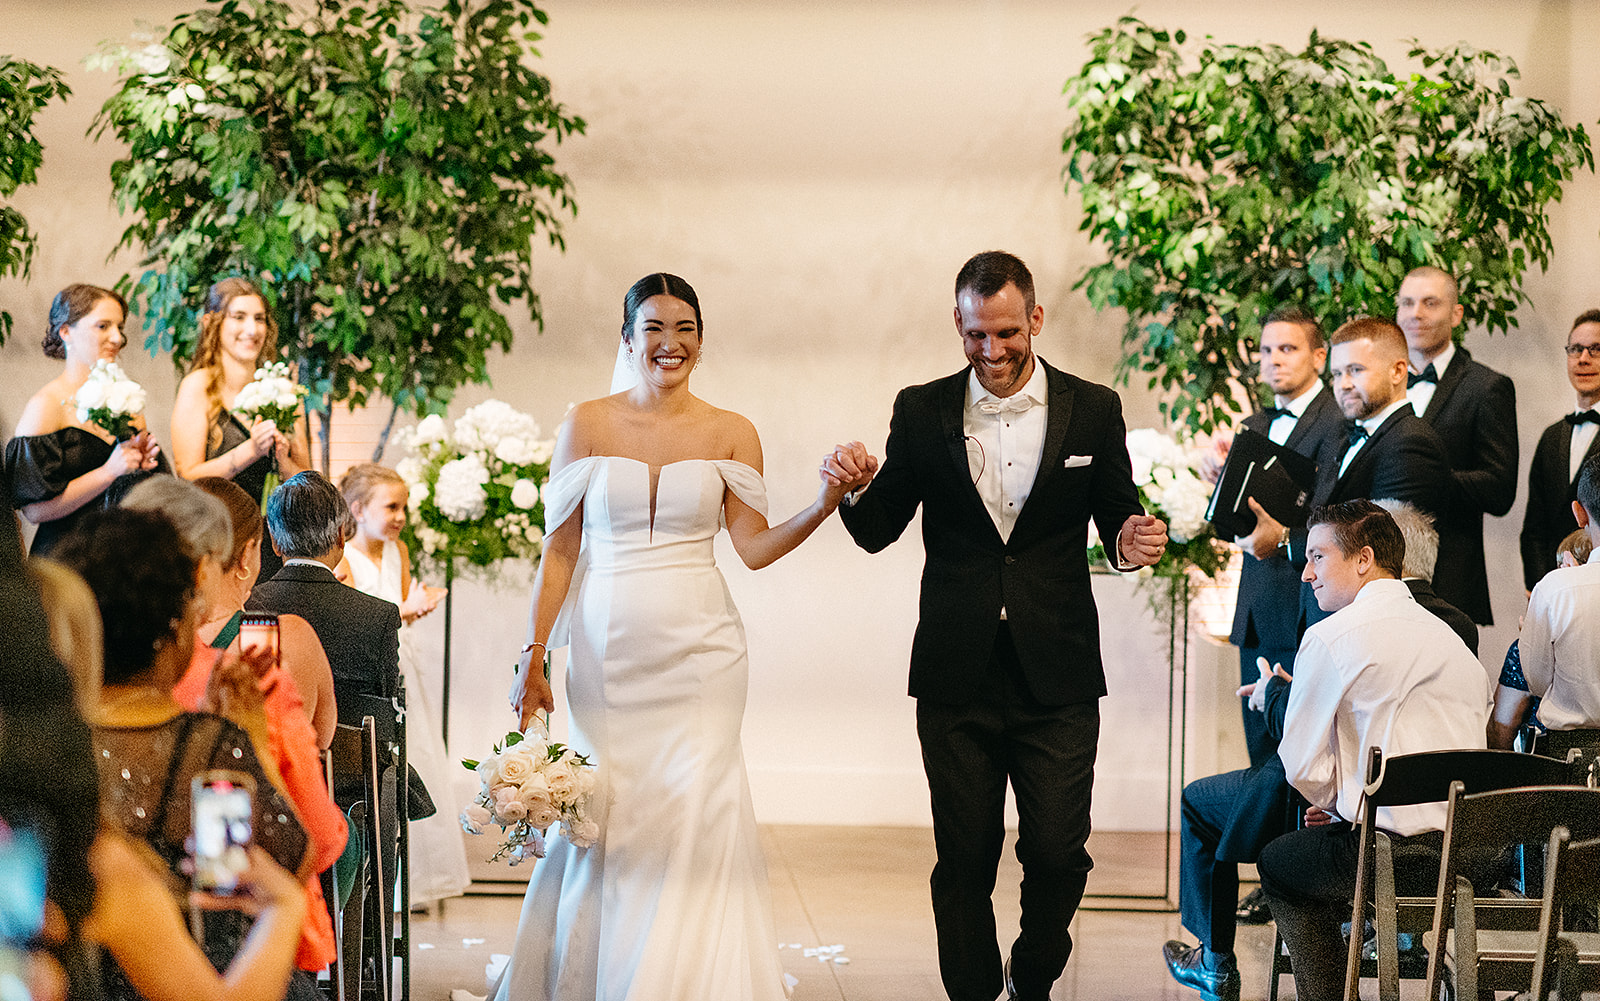 Newlyweds walk down the aisle together after their ceremony while the guests celebrate at a Saint Elle Wedding